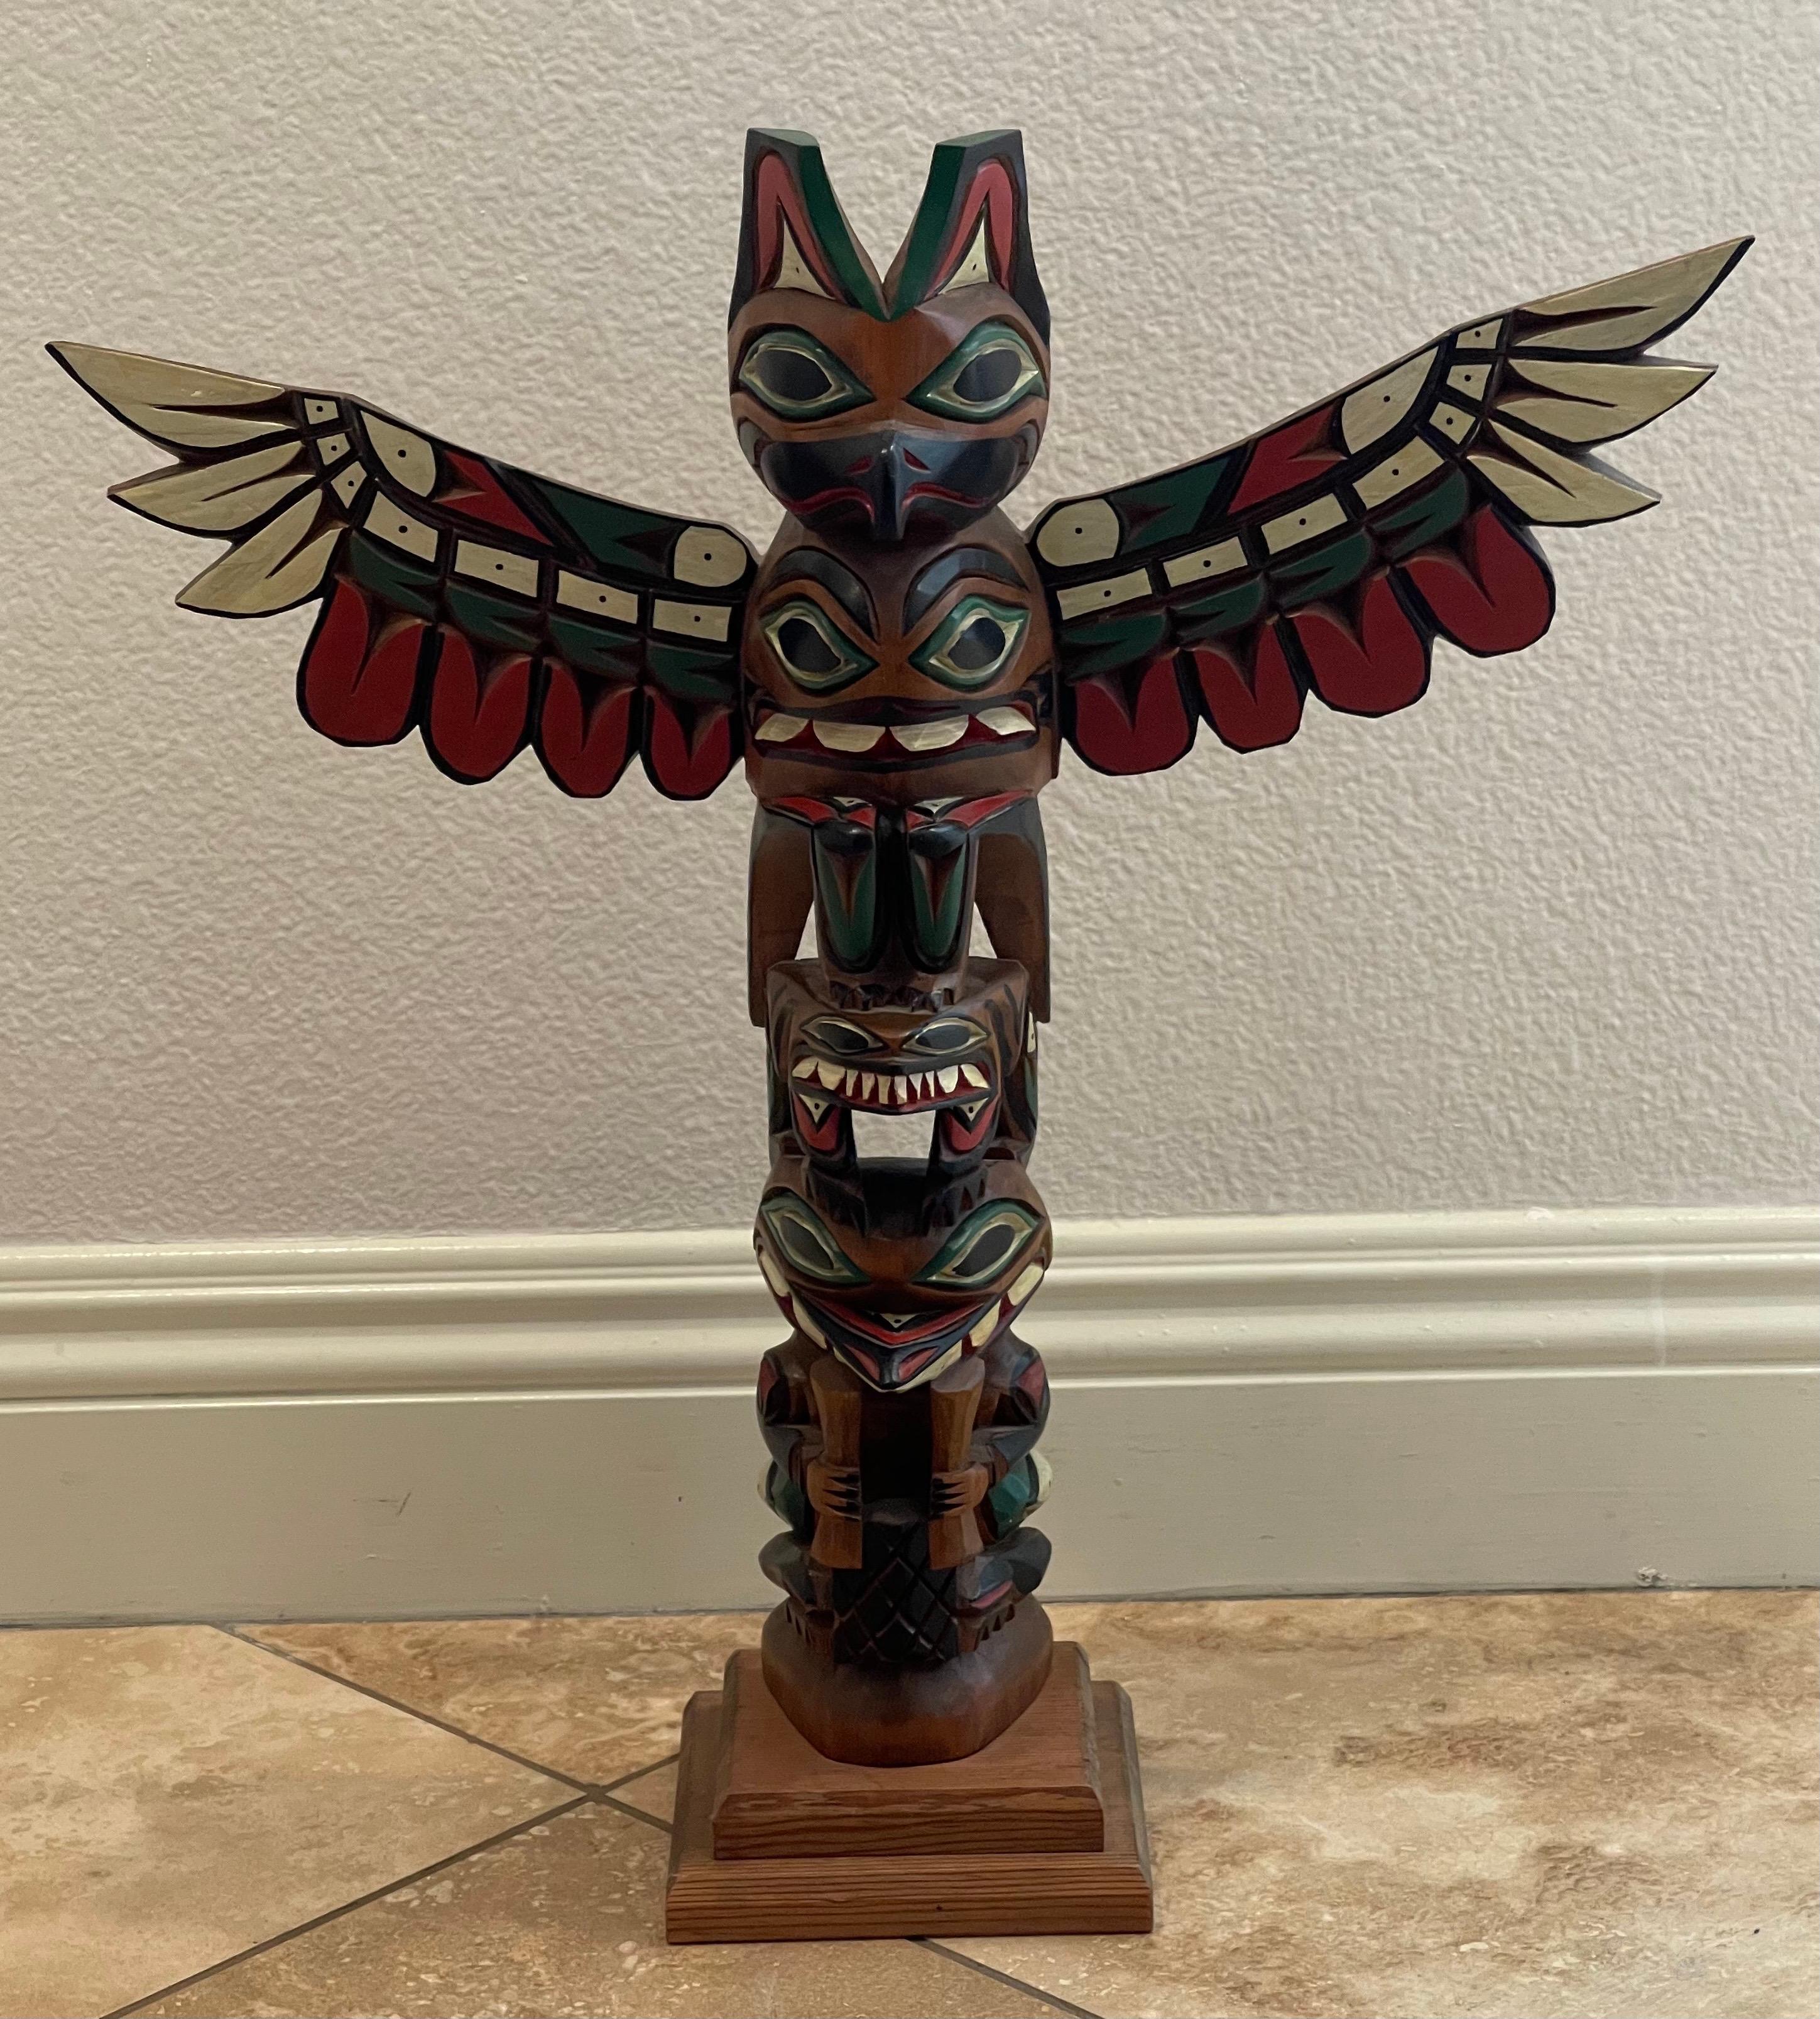 A fine example attributed to master Nuu-chah-nulth carver Sam Williams (1884-1979), circa 1930s. Sam Williams who started carving for the Ye Olde Curiosity shop in Seattle, WA in the early 1900s and his children, grandchildren and great